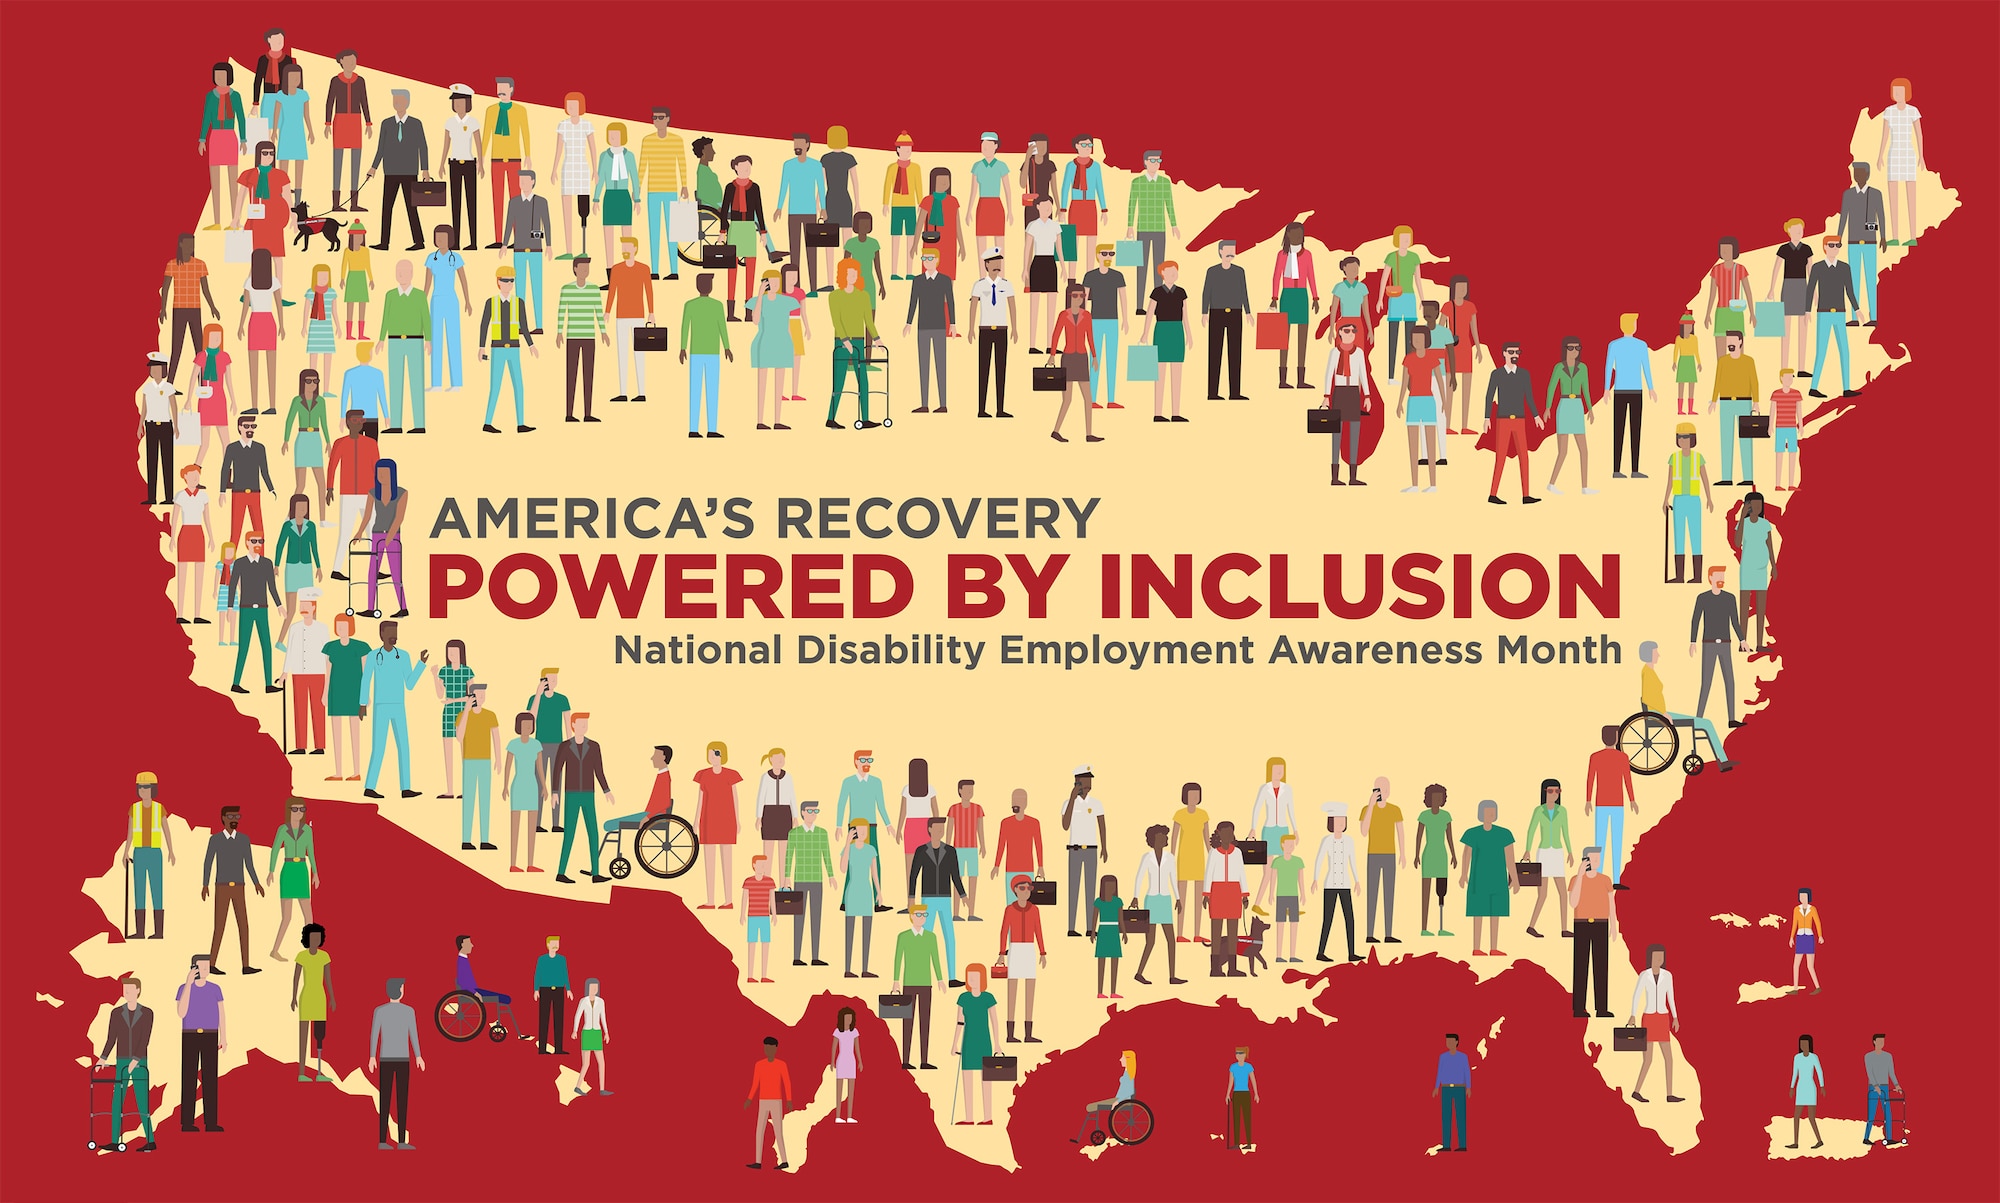 America's Recovery Powered by Inclusion